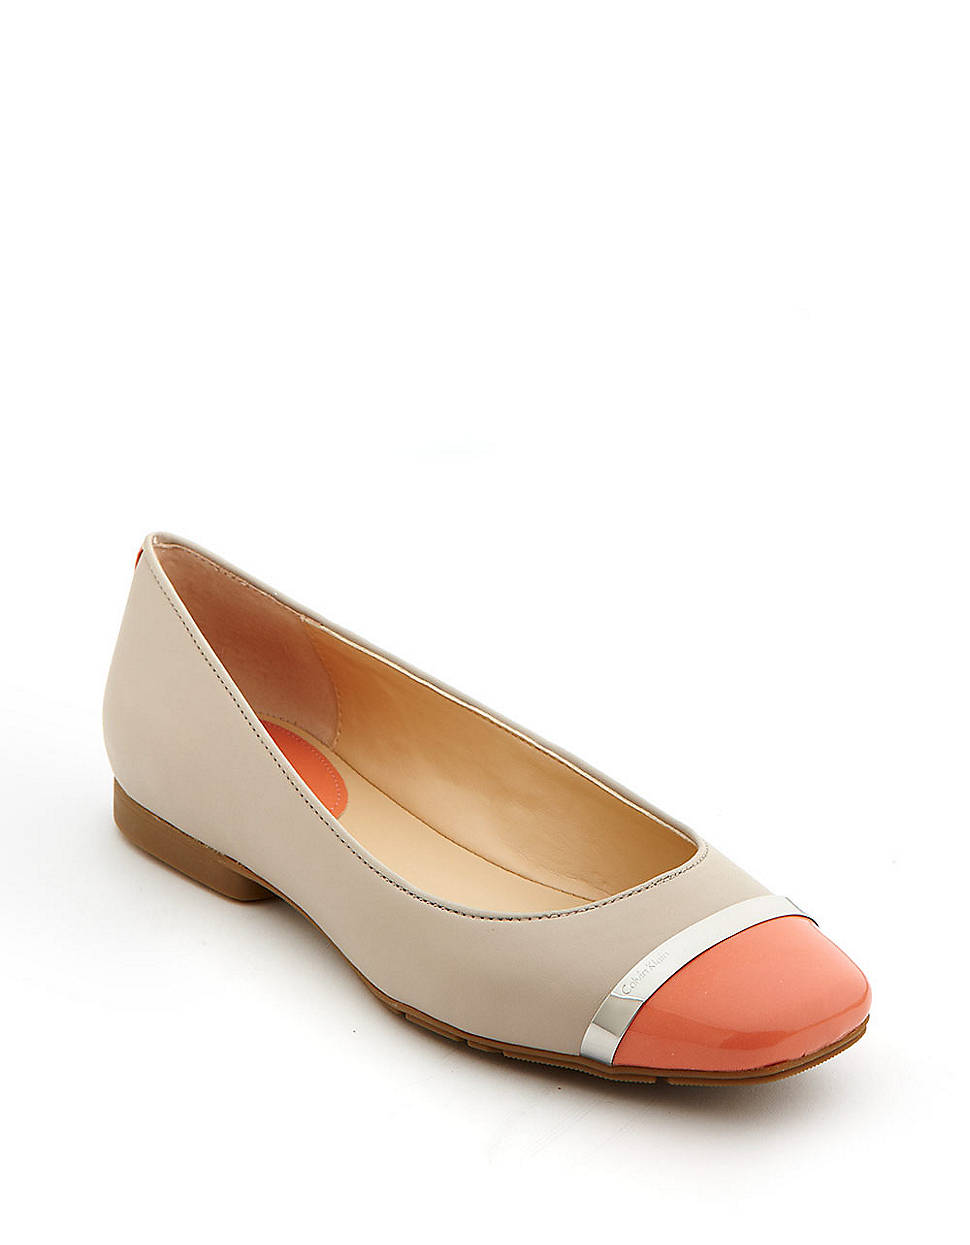 Calvin Klein Pash Colorblock Leather Flats in Natural - Lyst